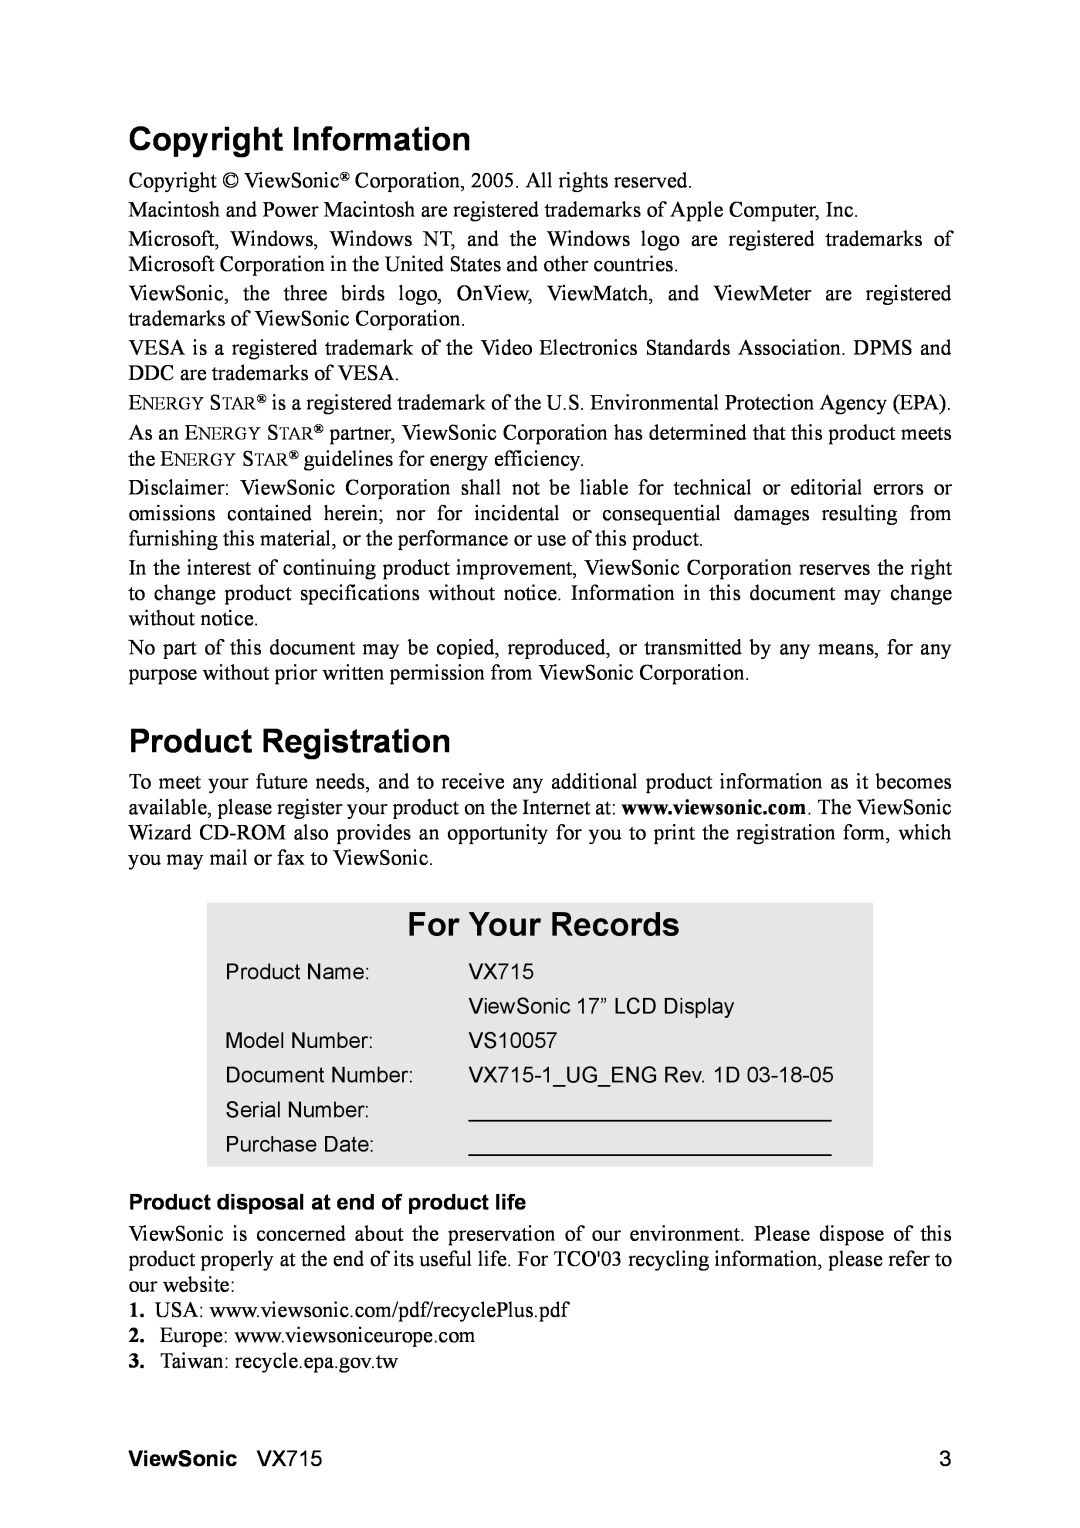 ViewSonic VX715 Copyright Information, Product Registration, For Your Records, Product disposal at end of product life 